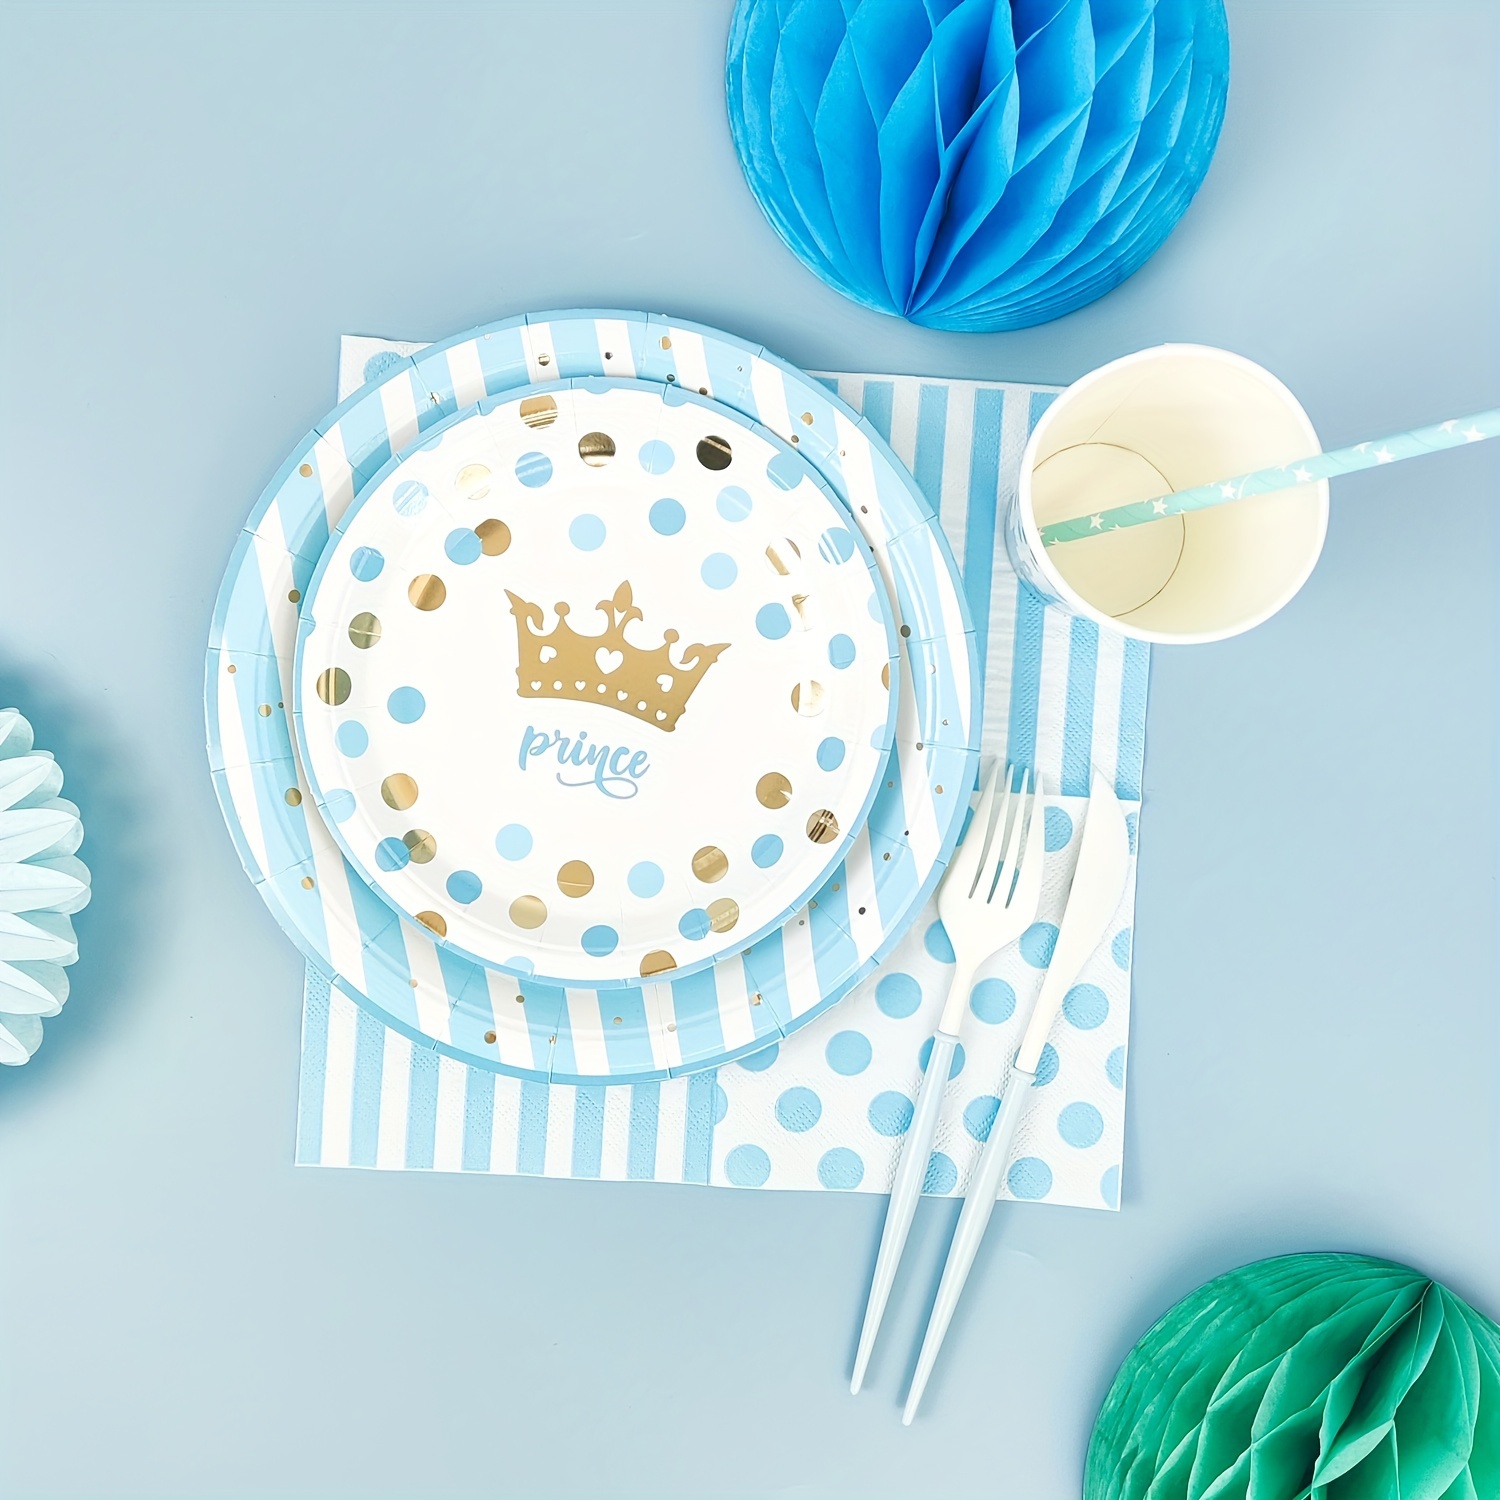 Disposable Birthday Party Supplies Kit for 8 Guests